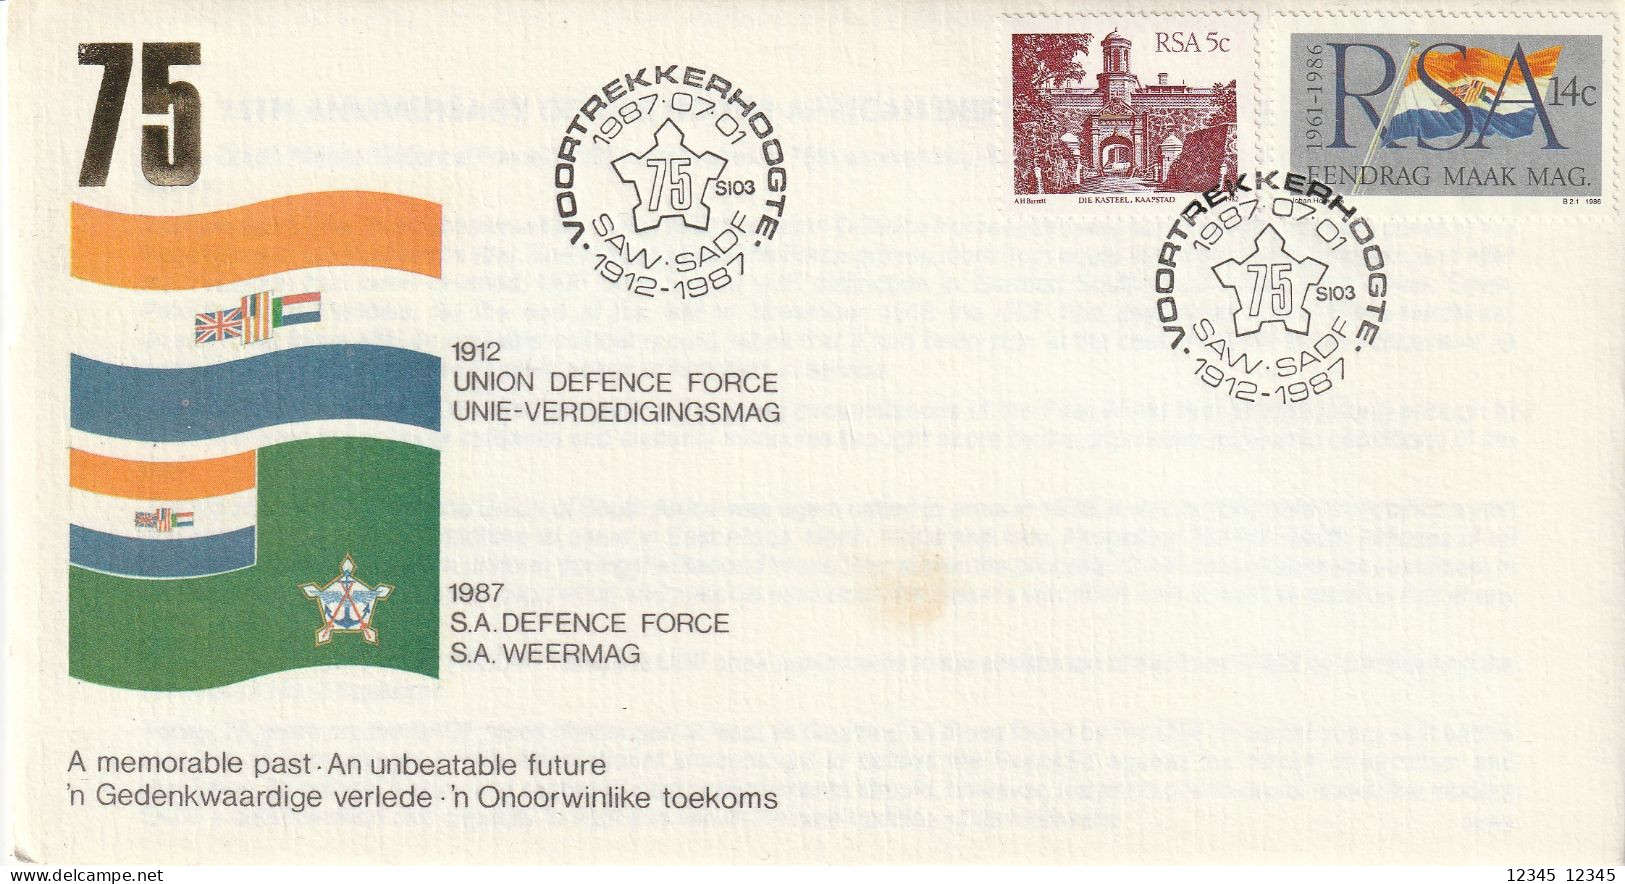 Zuid Afrika 1987, 1912 Union Defence Force 1987 S.A. Defence Force - Covers & Documents